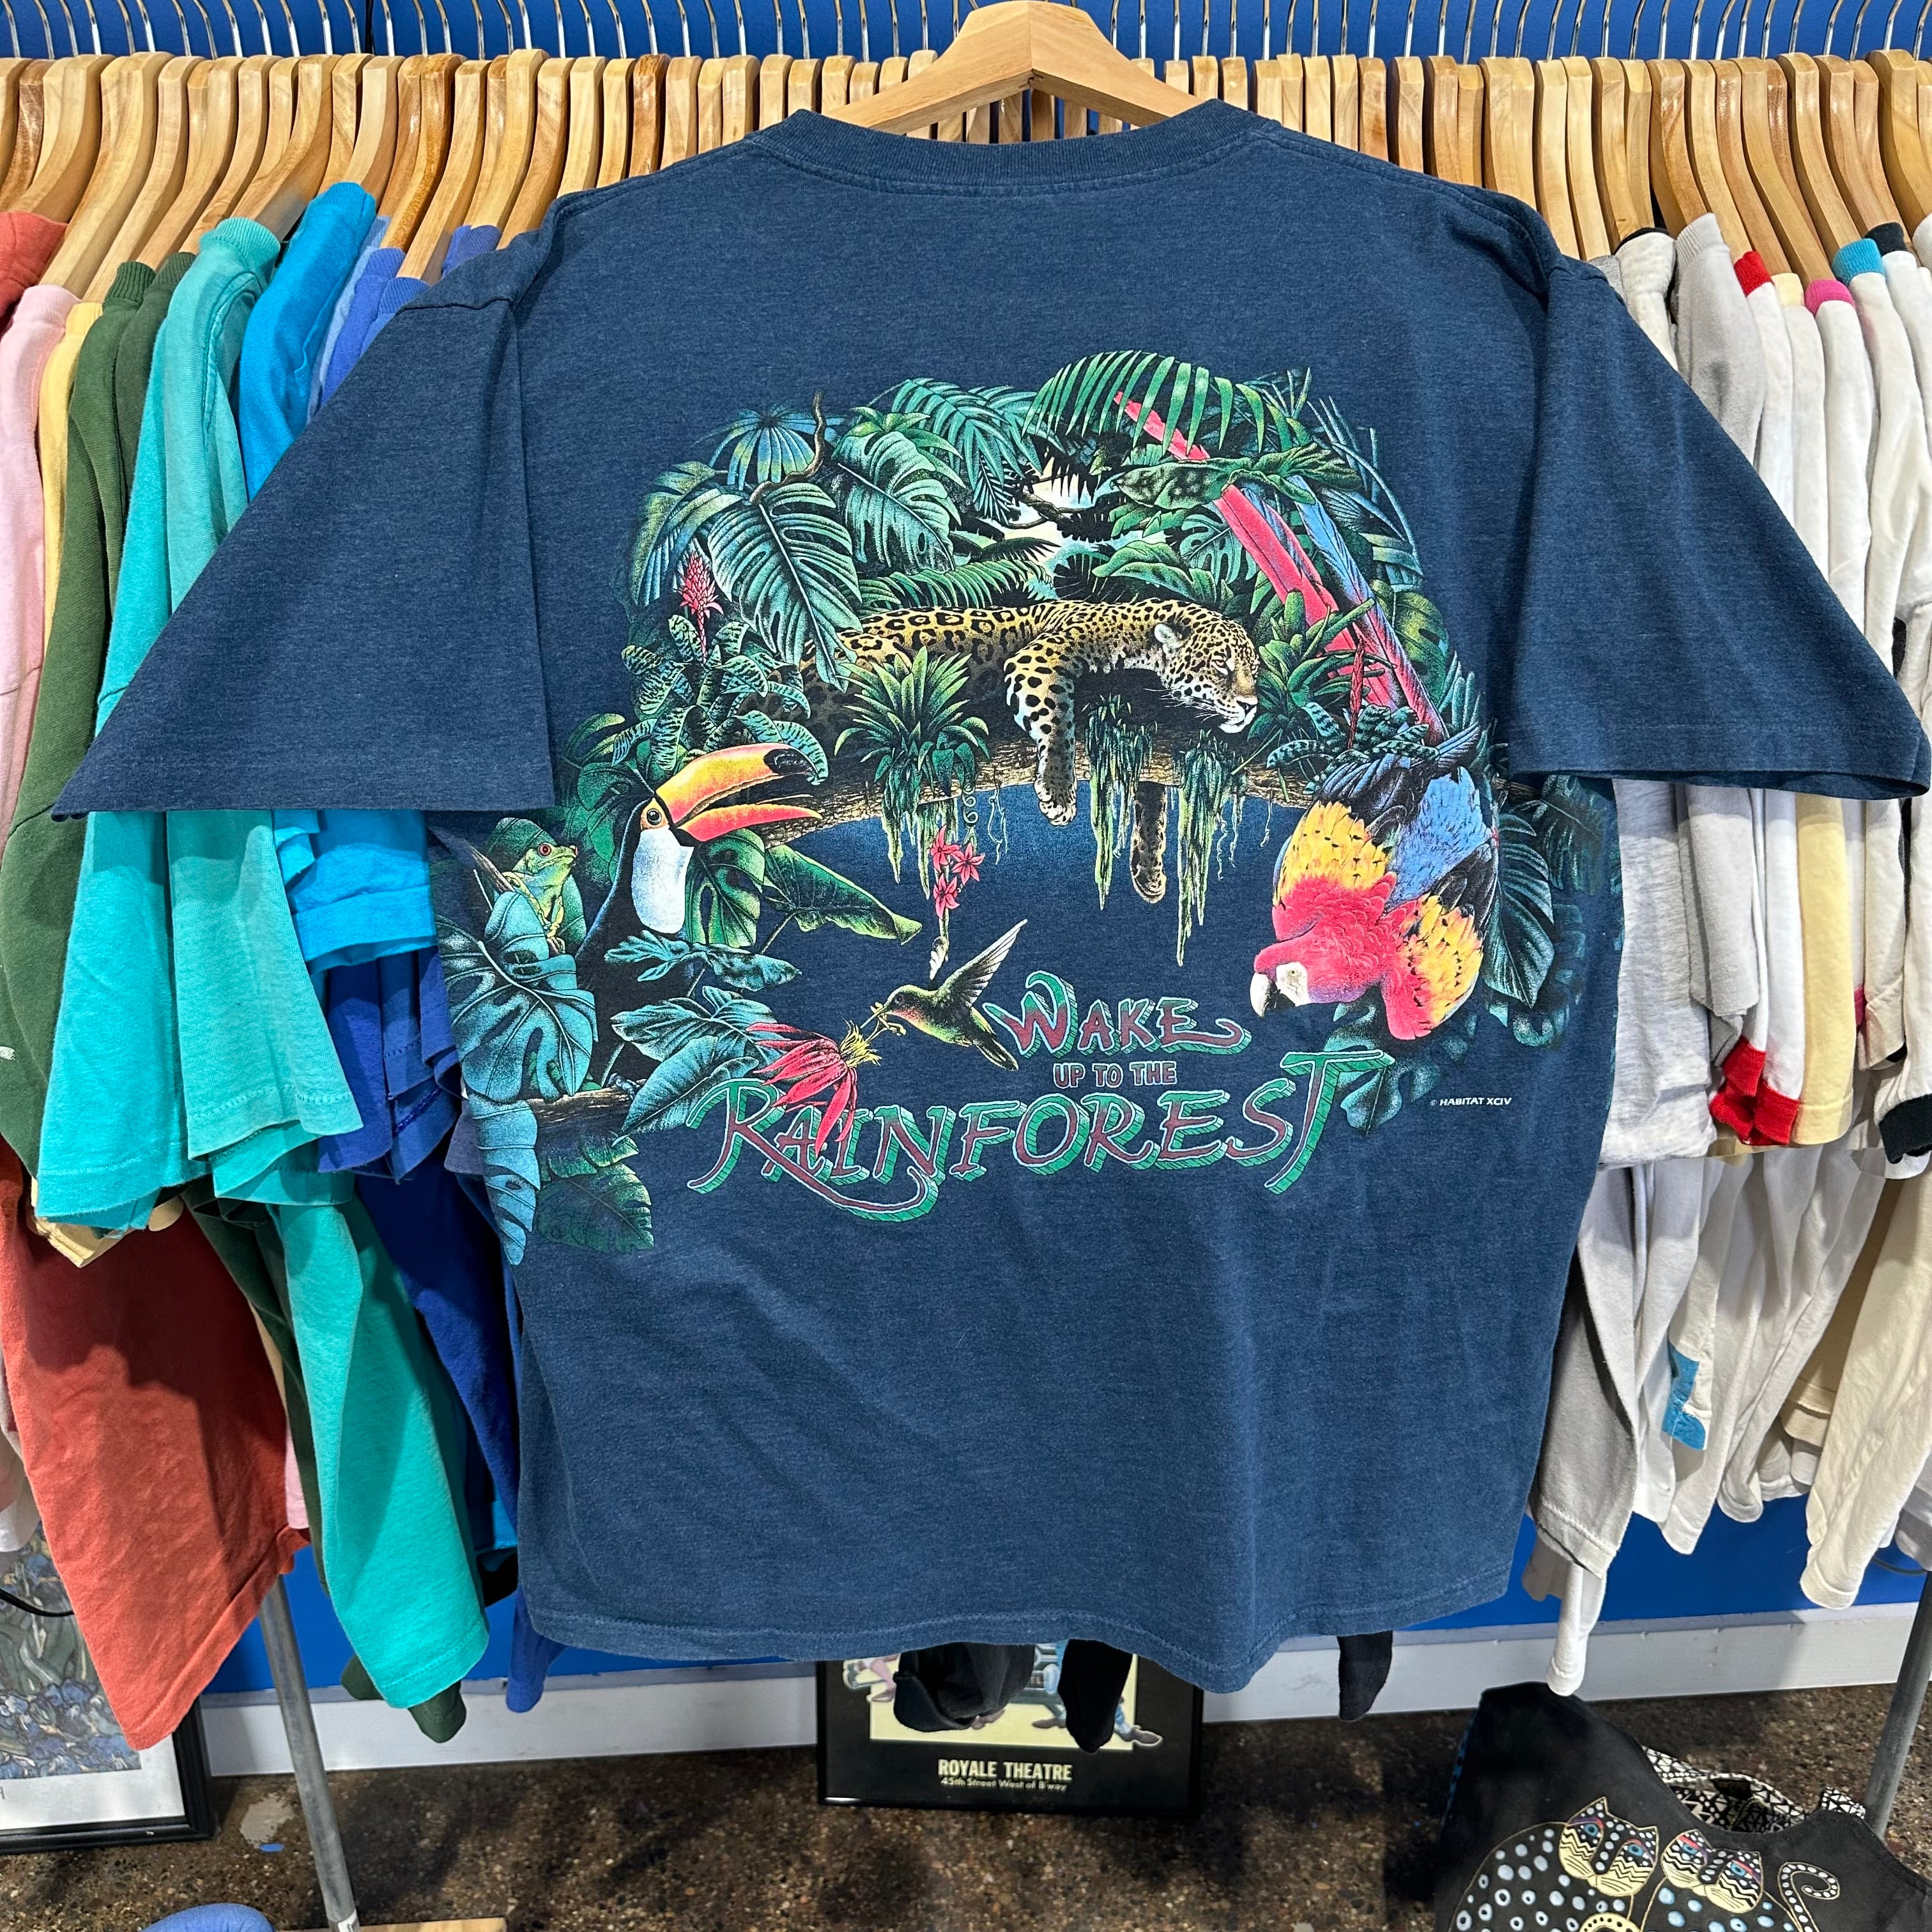 Wake up to the Rainforest T-Shirt